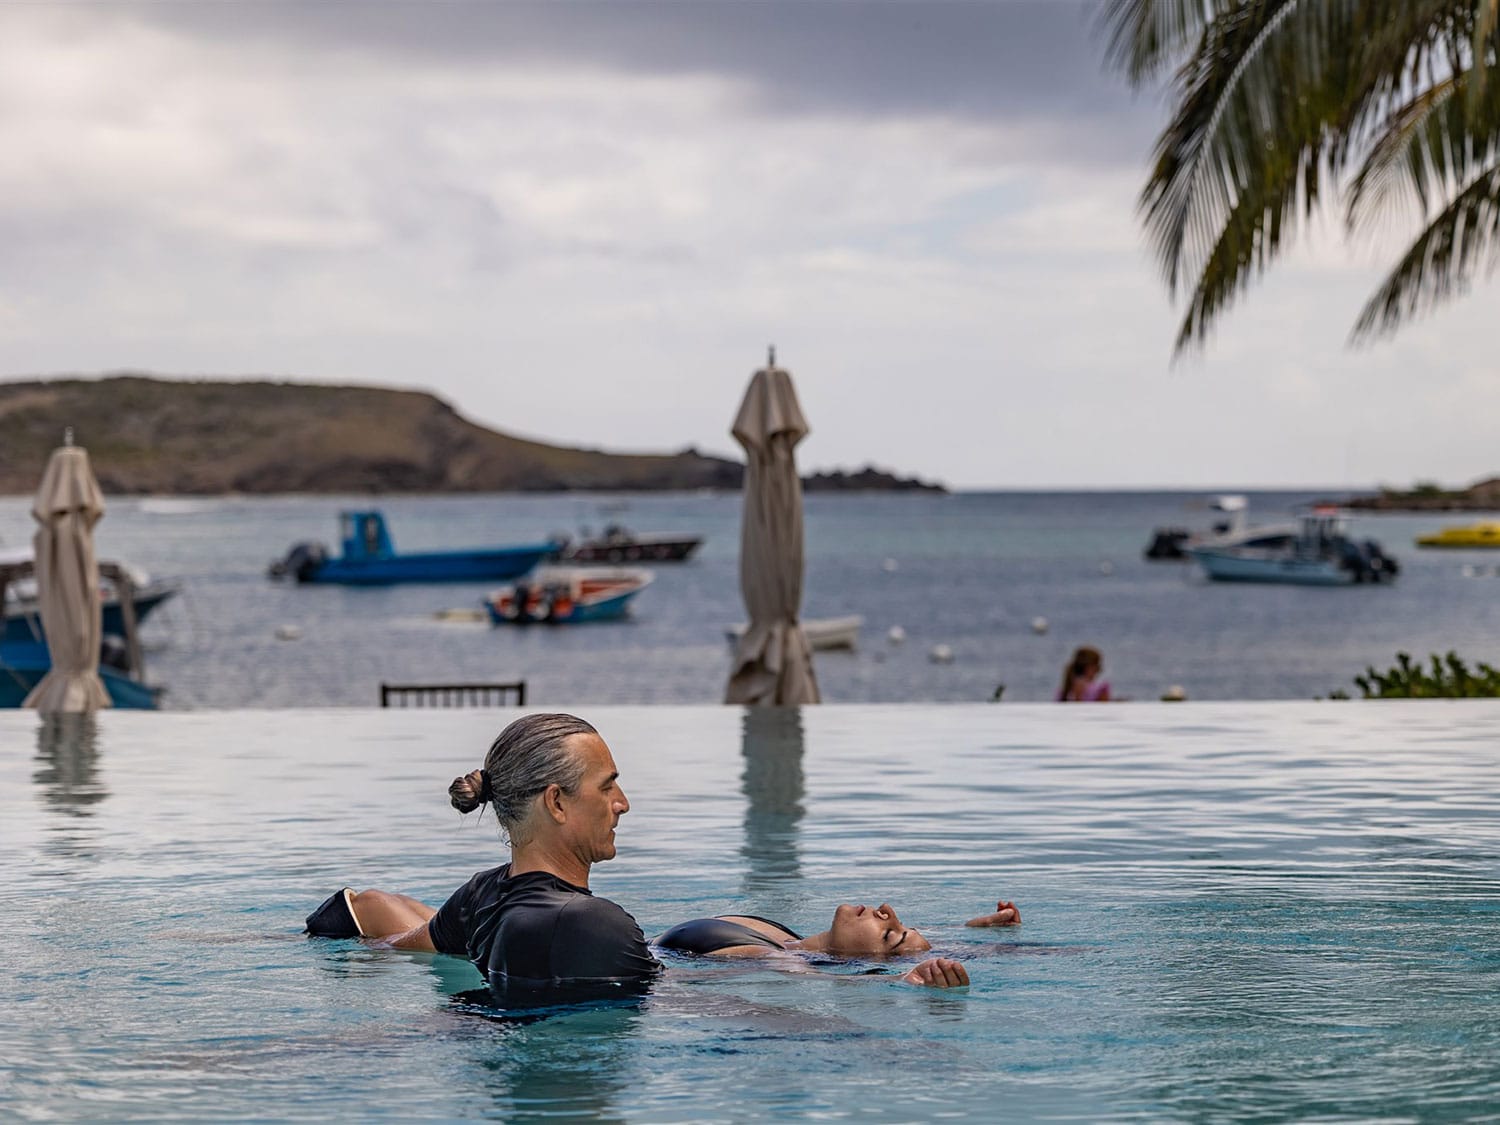 The infinity pool St. Barth’s Le Barthélemy Hotel and Spa, where a Janzu holistic healing session is being administered.